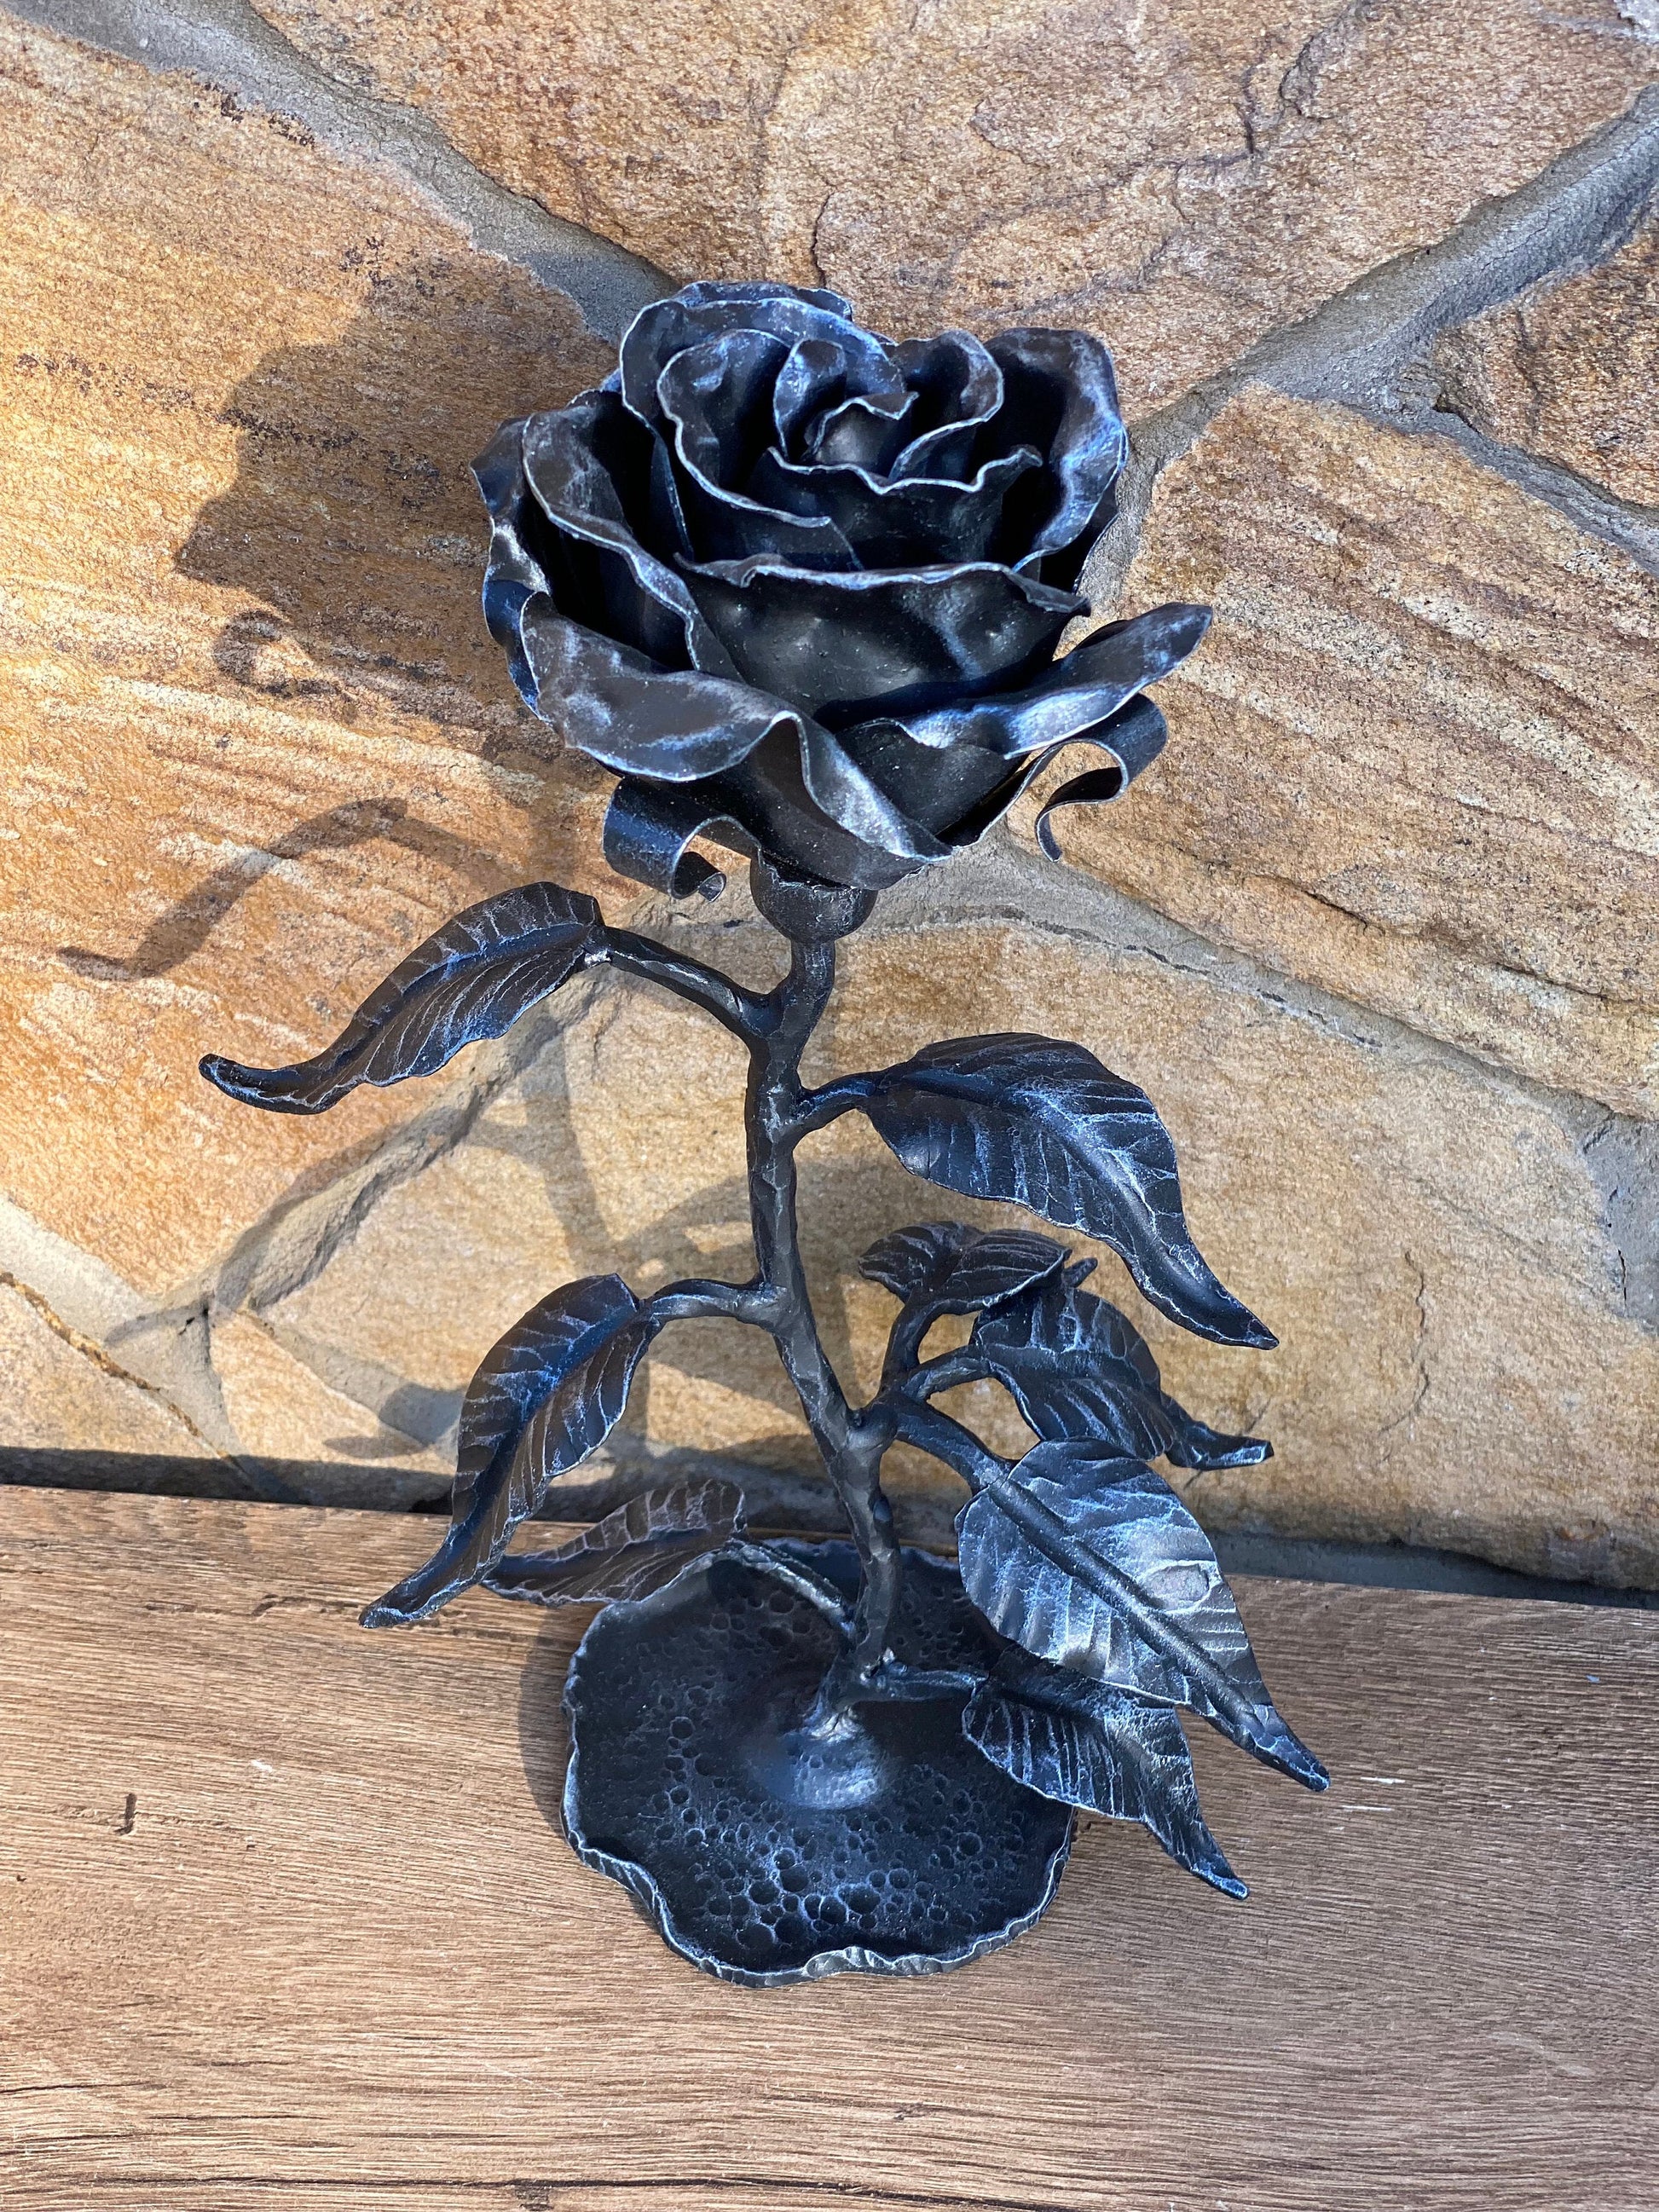 Hand forged rose, engagement, gift for couple, anniversary, wedding anniversary, wedding gift, iton gift for her, birthday, Christmas, wife